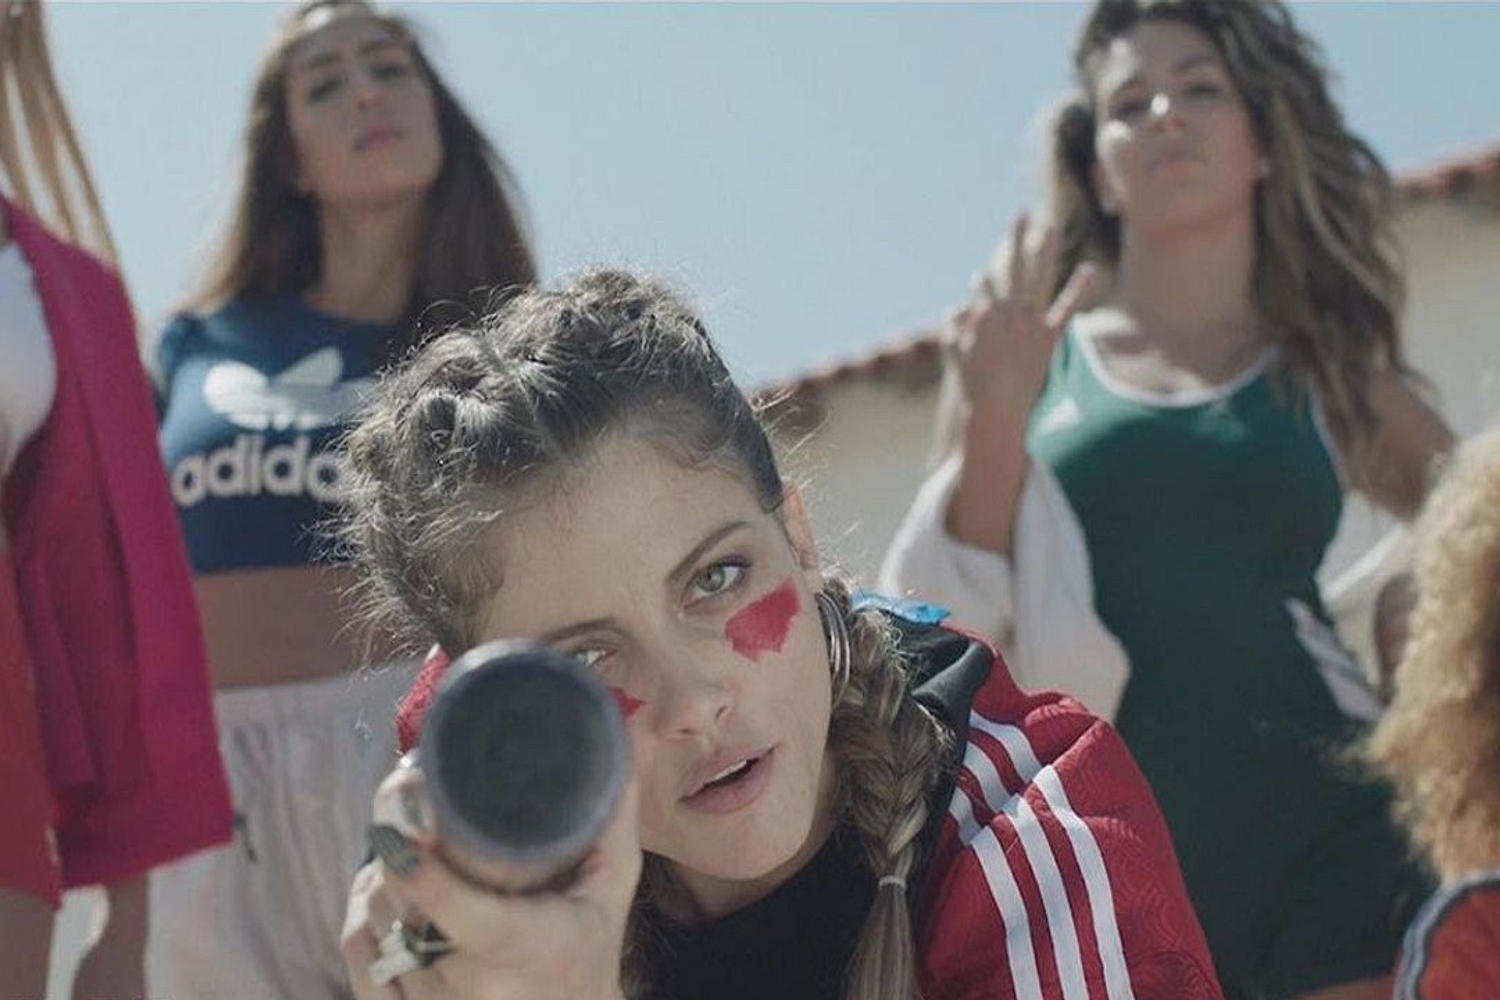 Noga Erez disrupts the peace in the video for ‘Noisy’